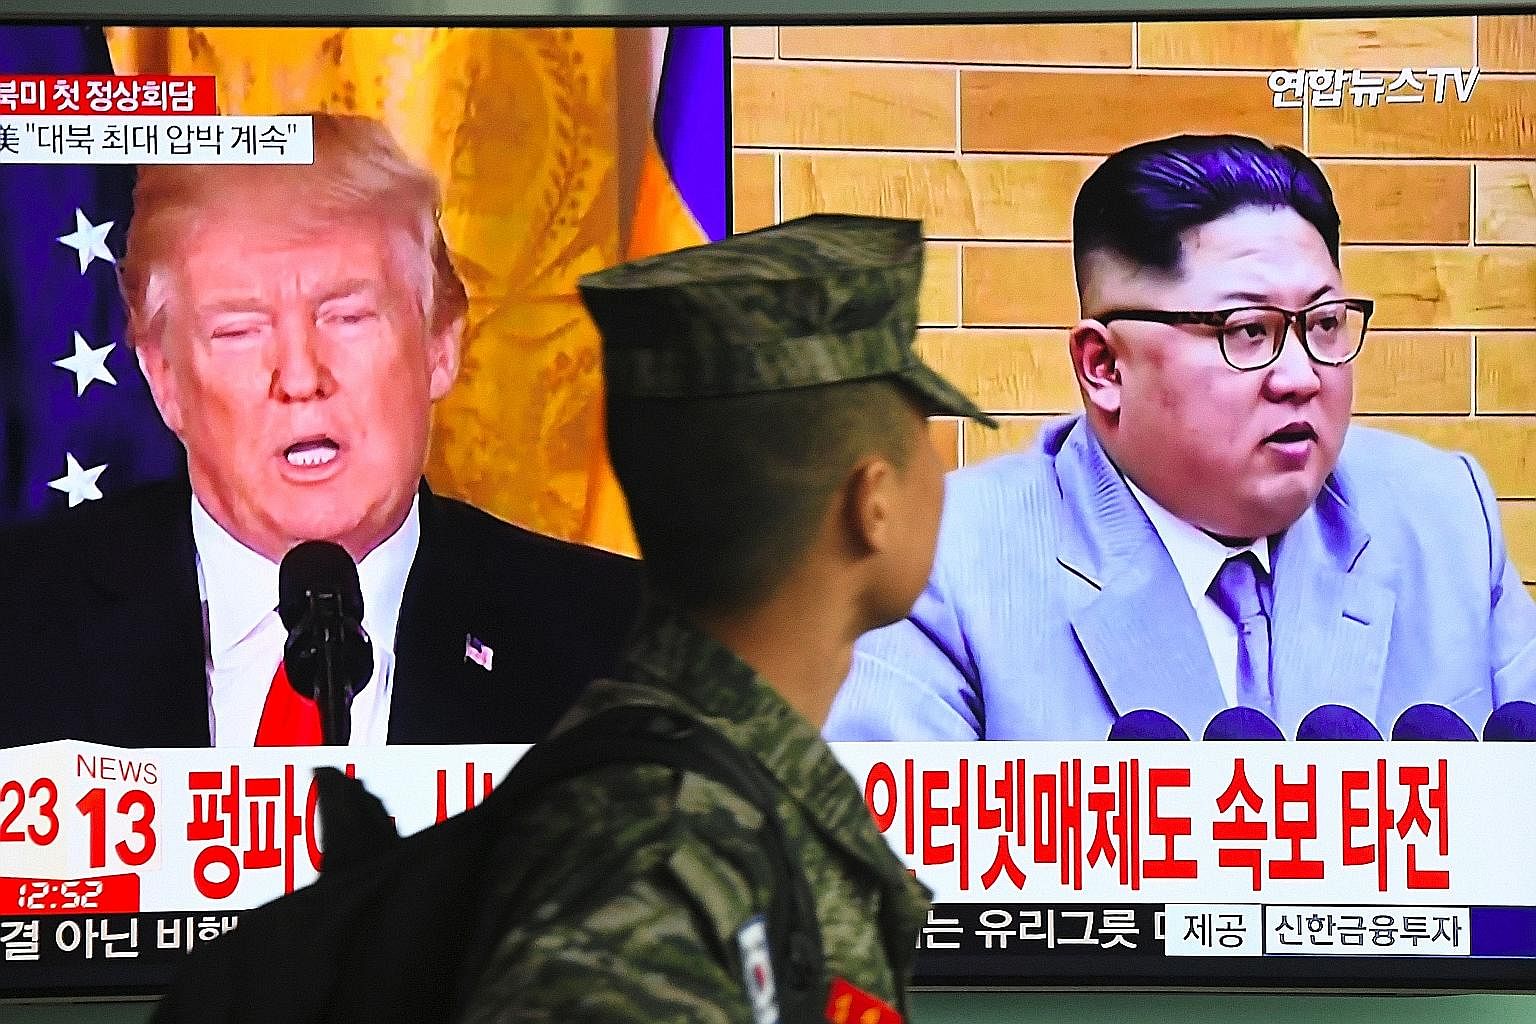 A television screen showing pictures of Mr Donald Trump and Mr Kim Jong Un at a Seoul railway station on Friday.